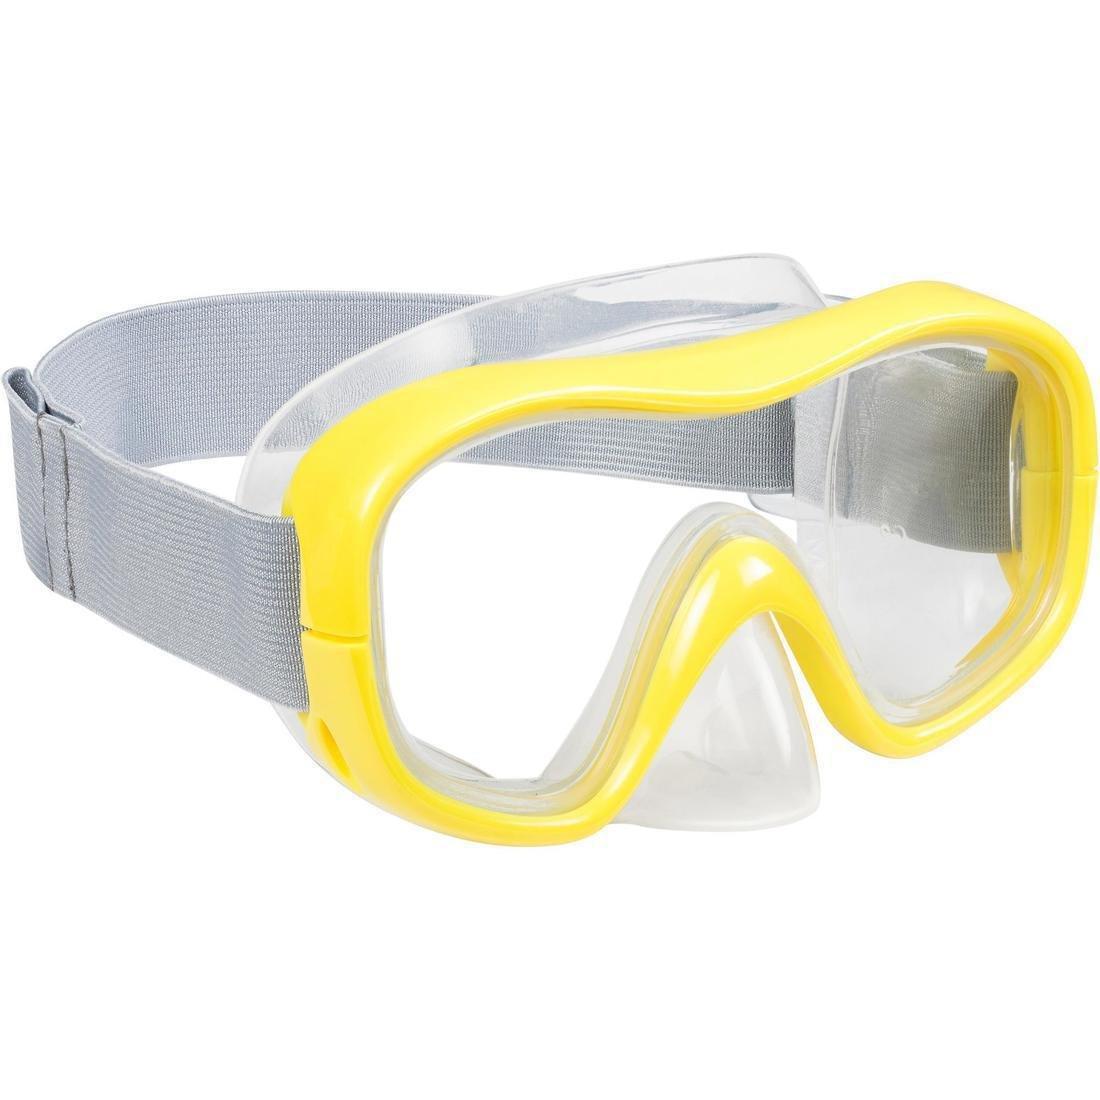 SUBEA - SNK 500 Adult and Junior Mask and Snorkel Snorkelling Set, Storm Grey